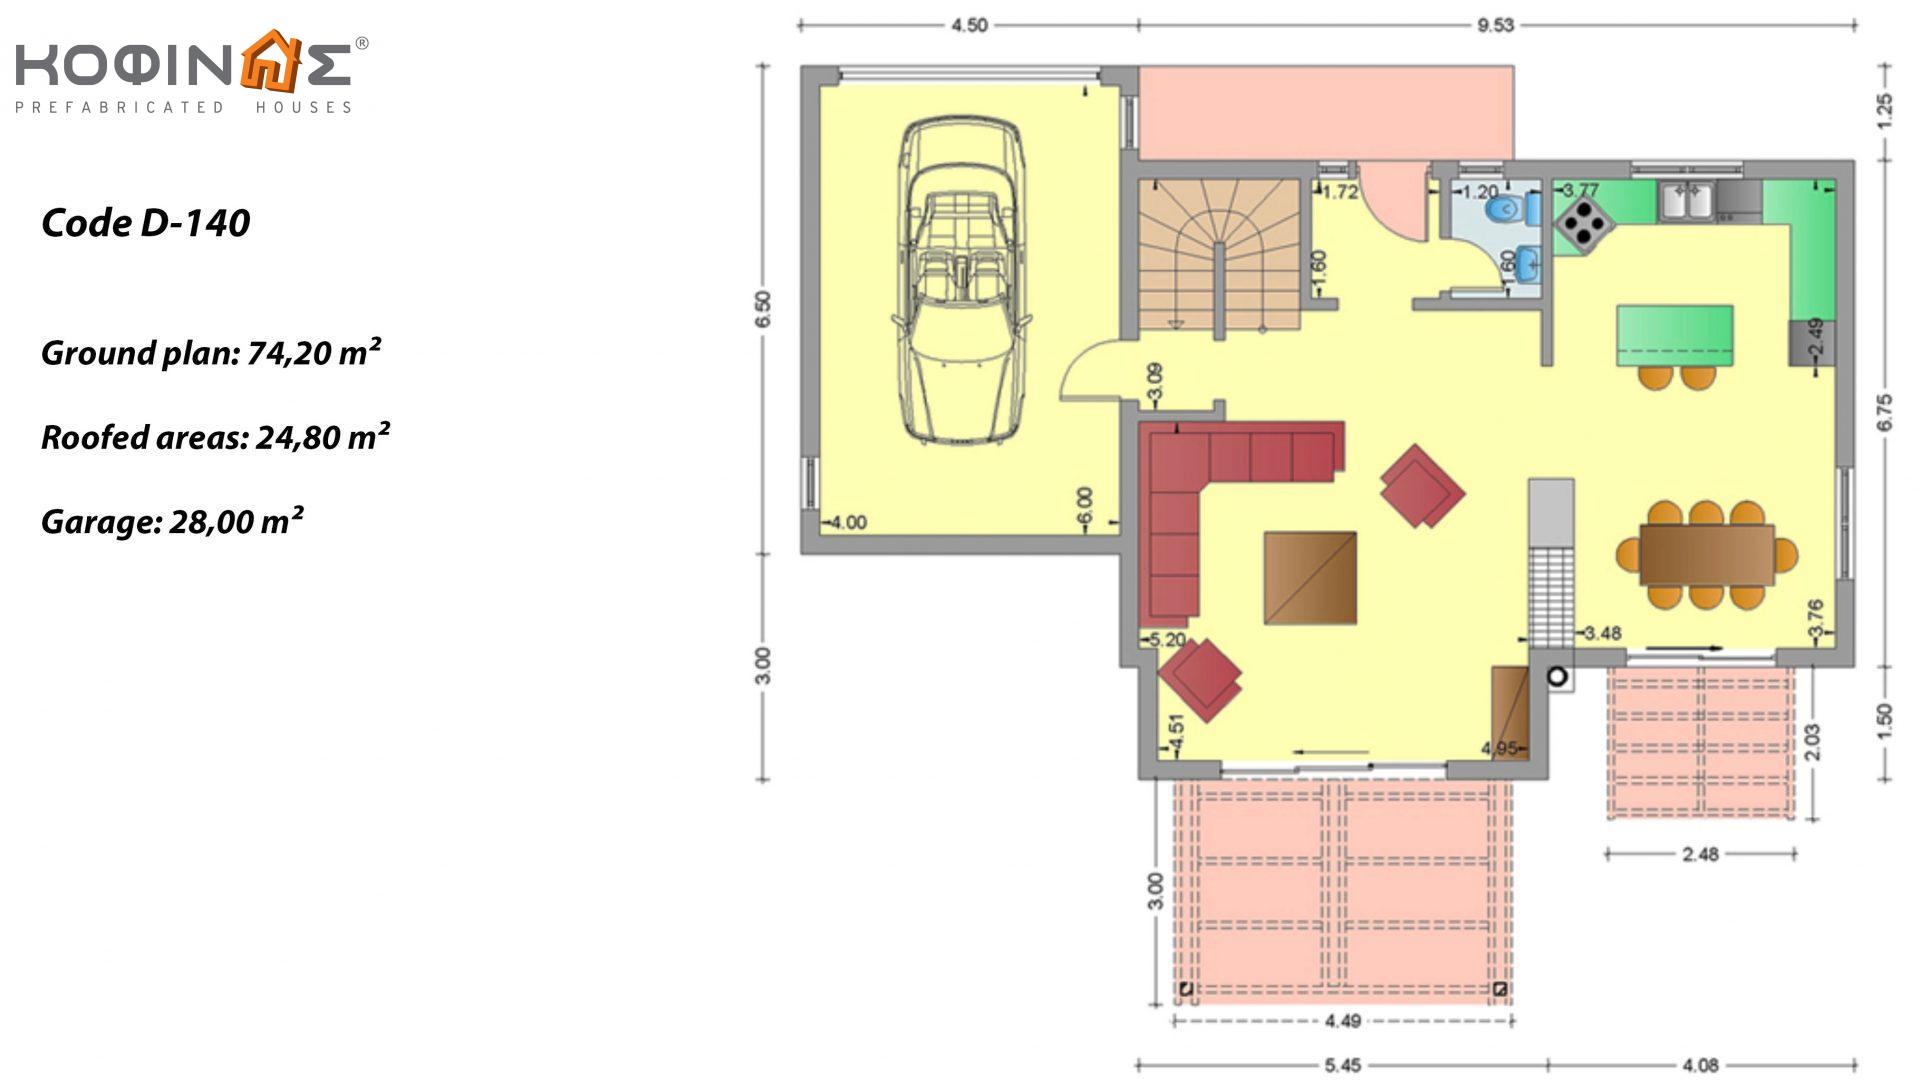 2-story house D-140, total surface of 140,20 m², +Garage 28.00 m²(=168.20 m²),covered roofed areas 33.00 m²,balconies 8.20 m²